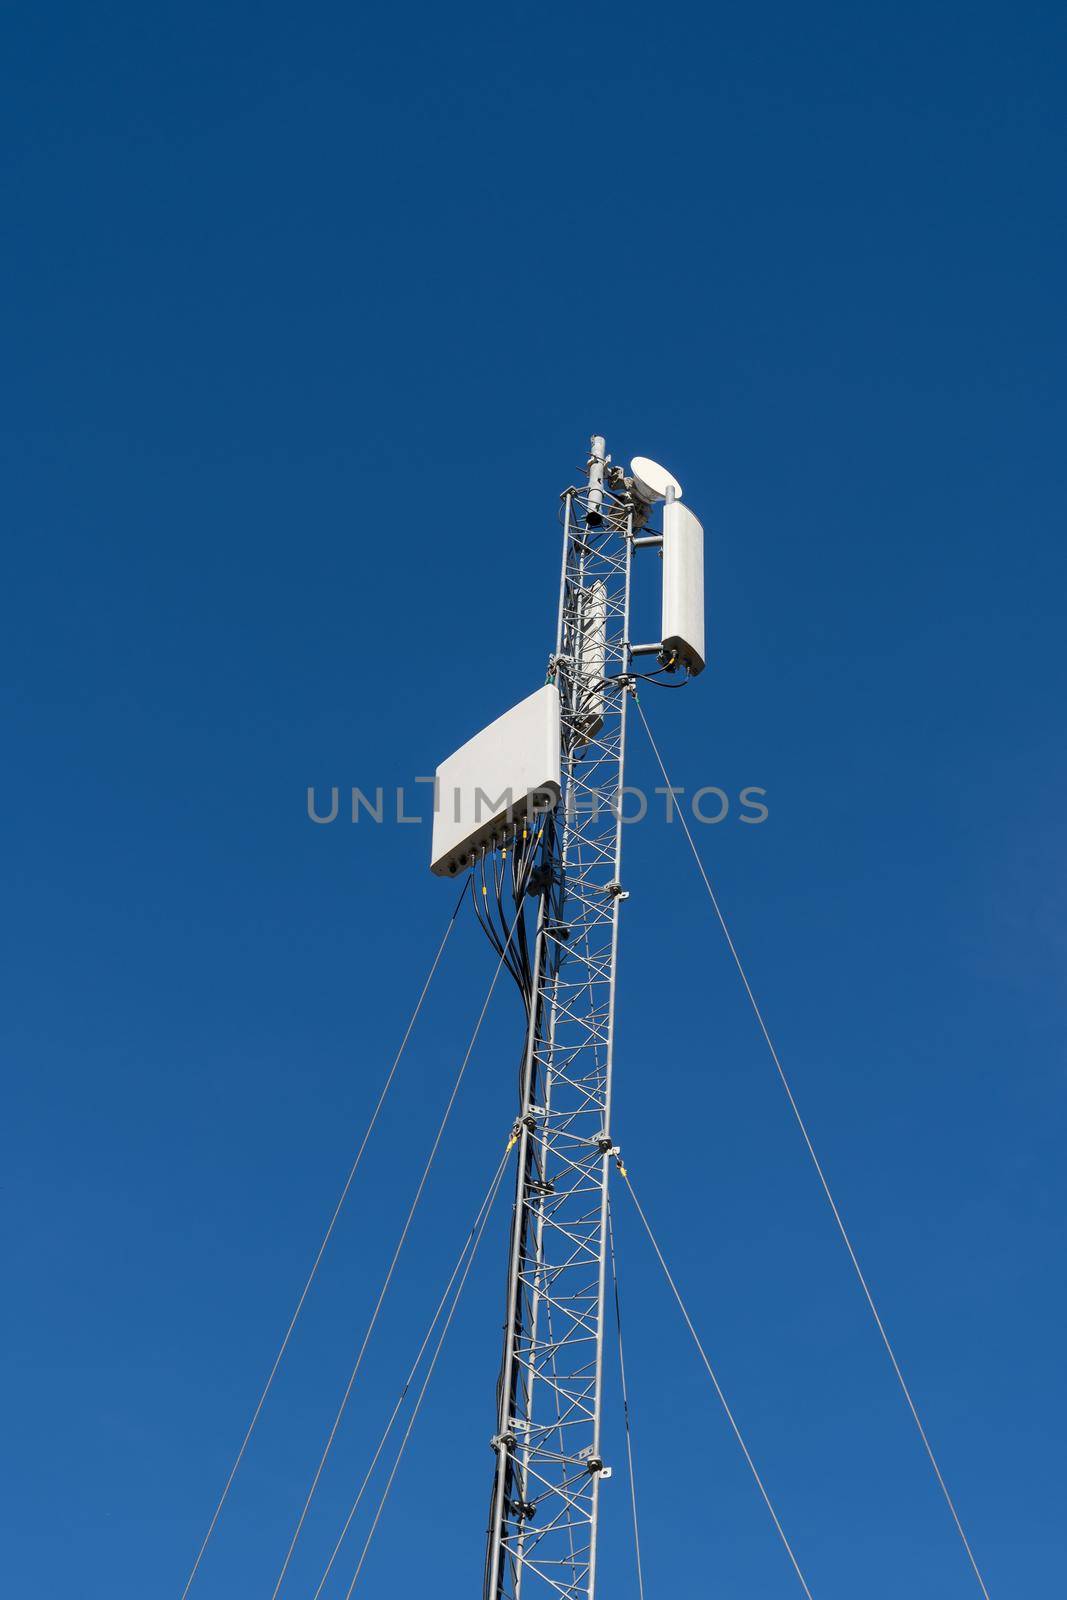 Modern wireless telecommunication tower antenna transmitter or base reciever station for broadcasting 4G or 5G cellular telephone, television, and Internet signals, against a blue sky. by LeoniekvanderVliet